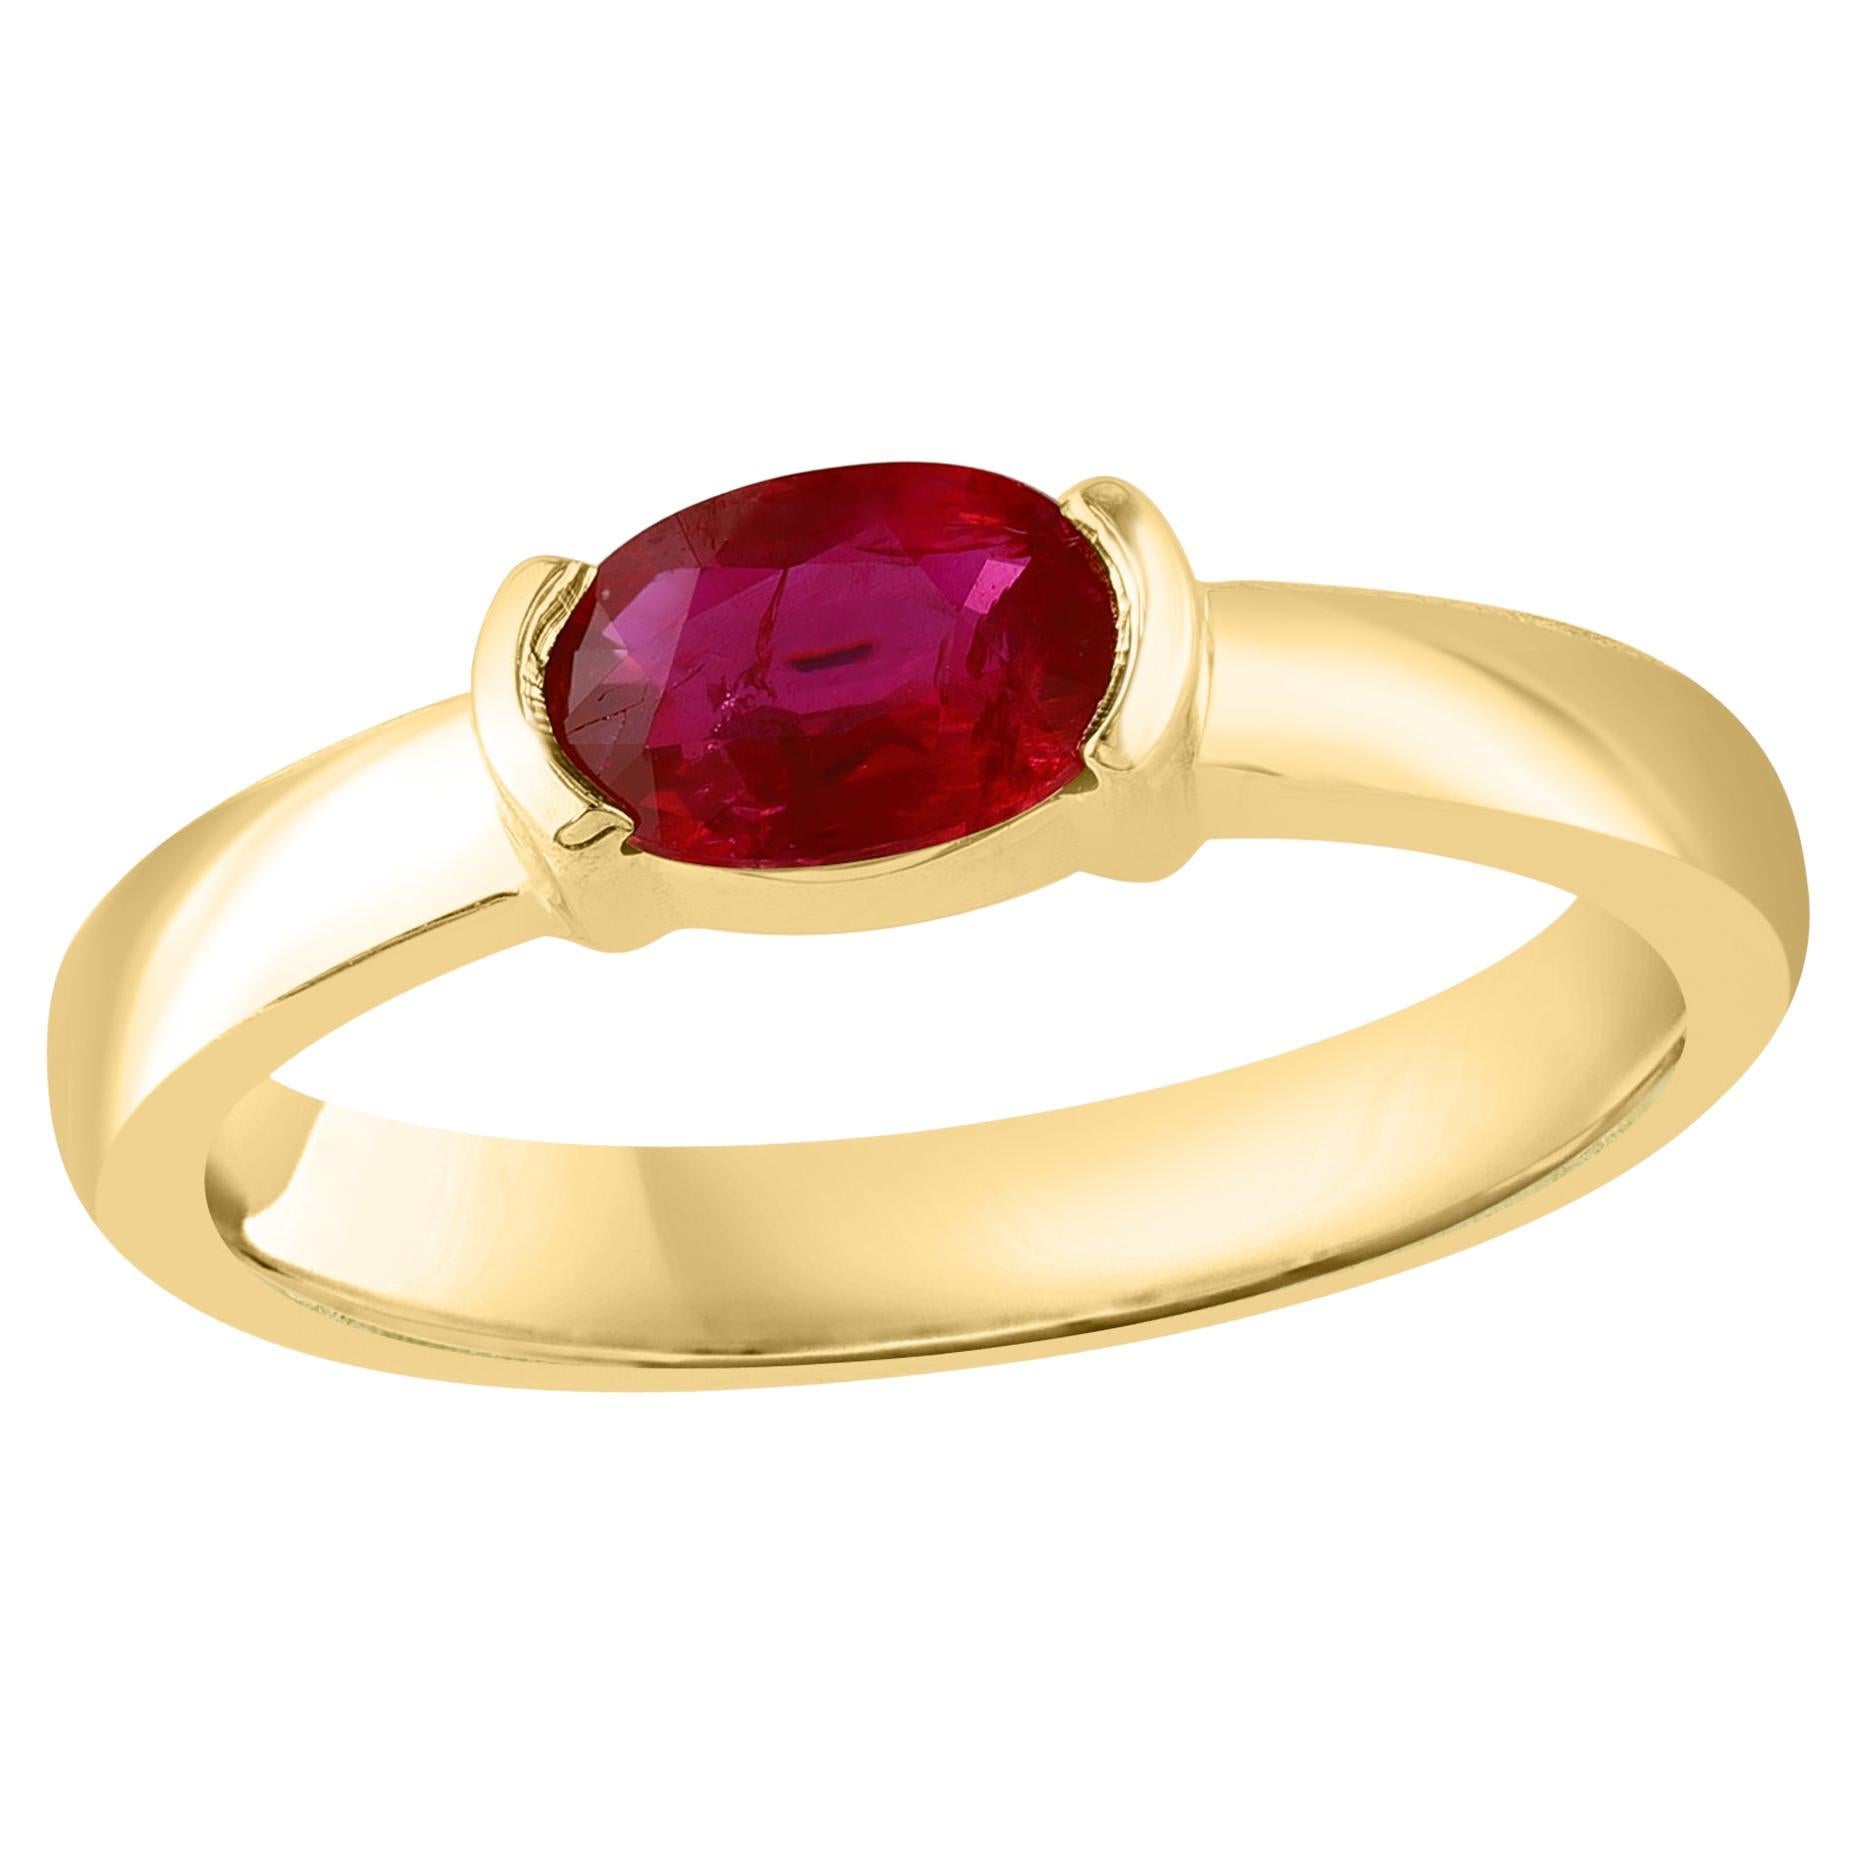 0.78 Carat Oval Cut Ruby Band Ring in 14K Yellow Gold For Sale